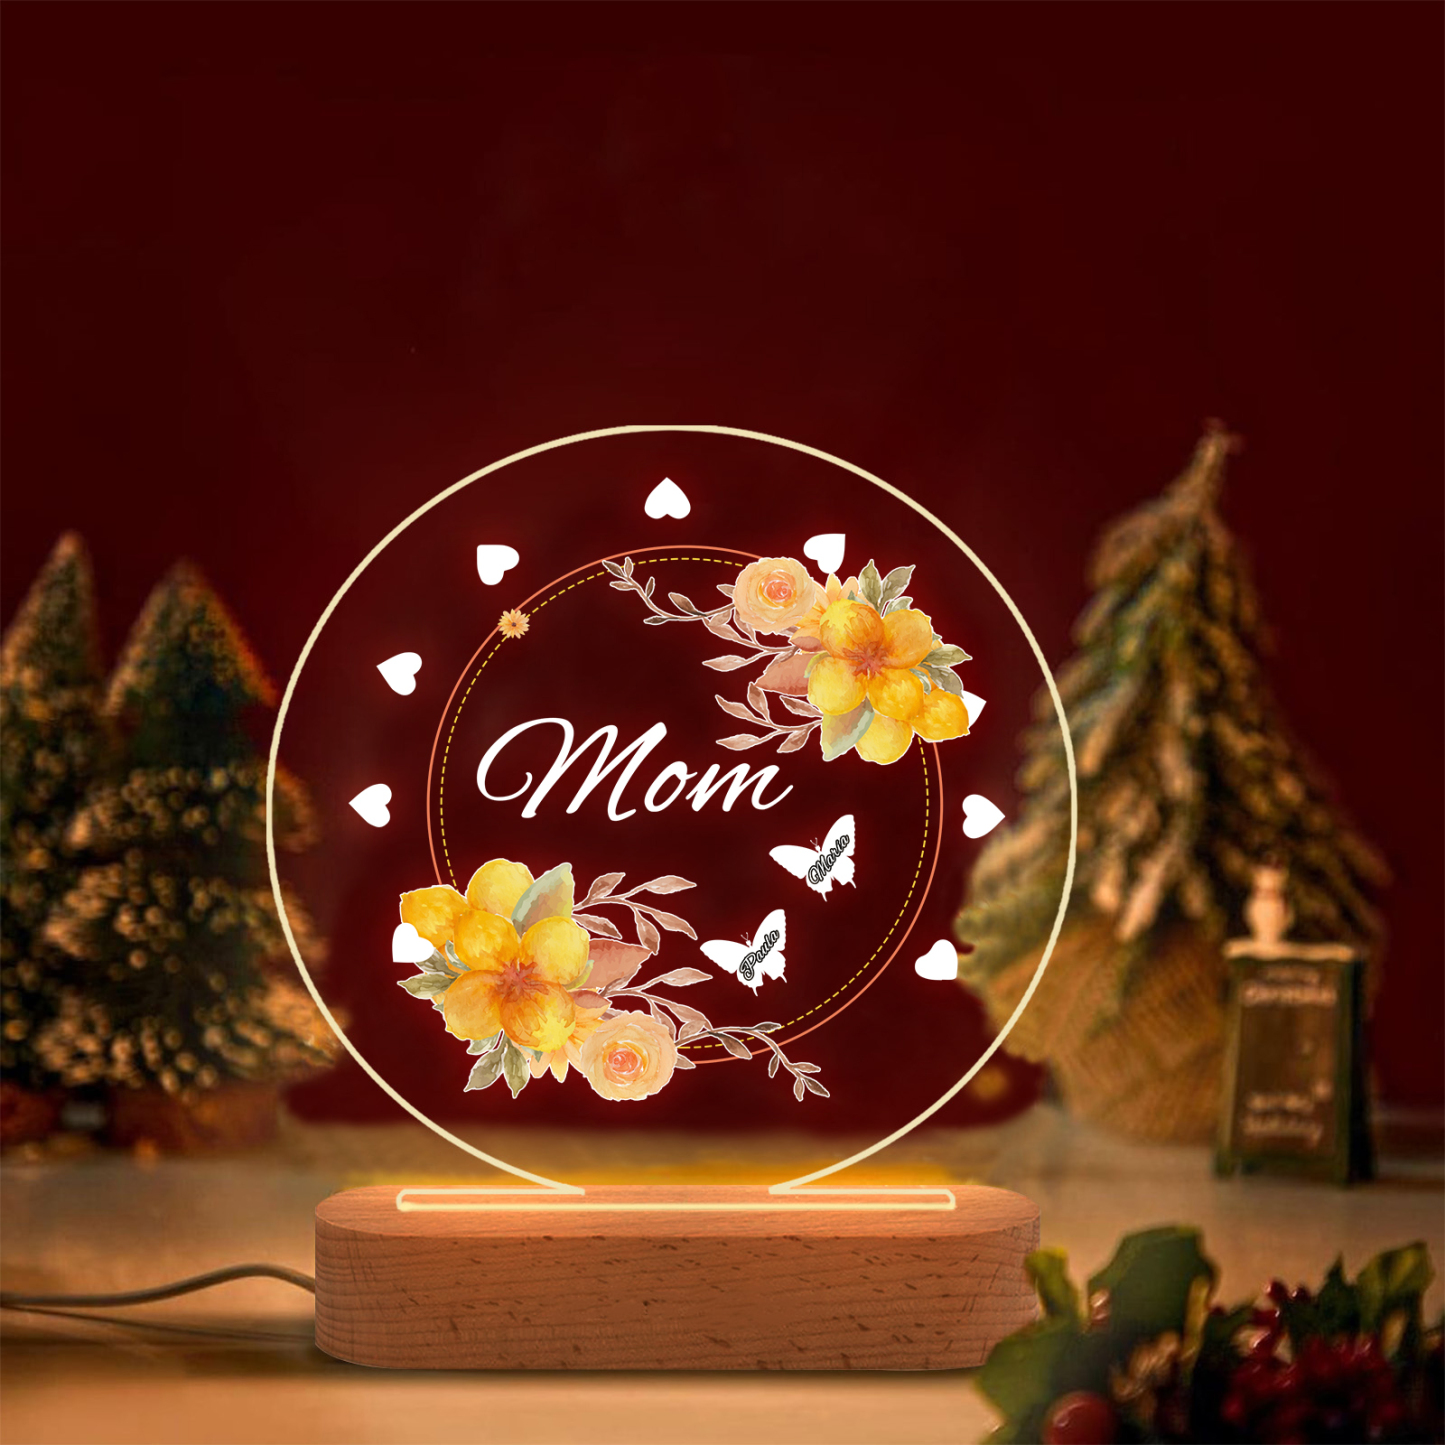 2 Name-Personalized Home Night Light Customized Family Member Names with LED Lighting Bedroom Decor for Mom